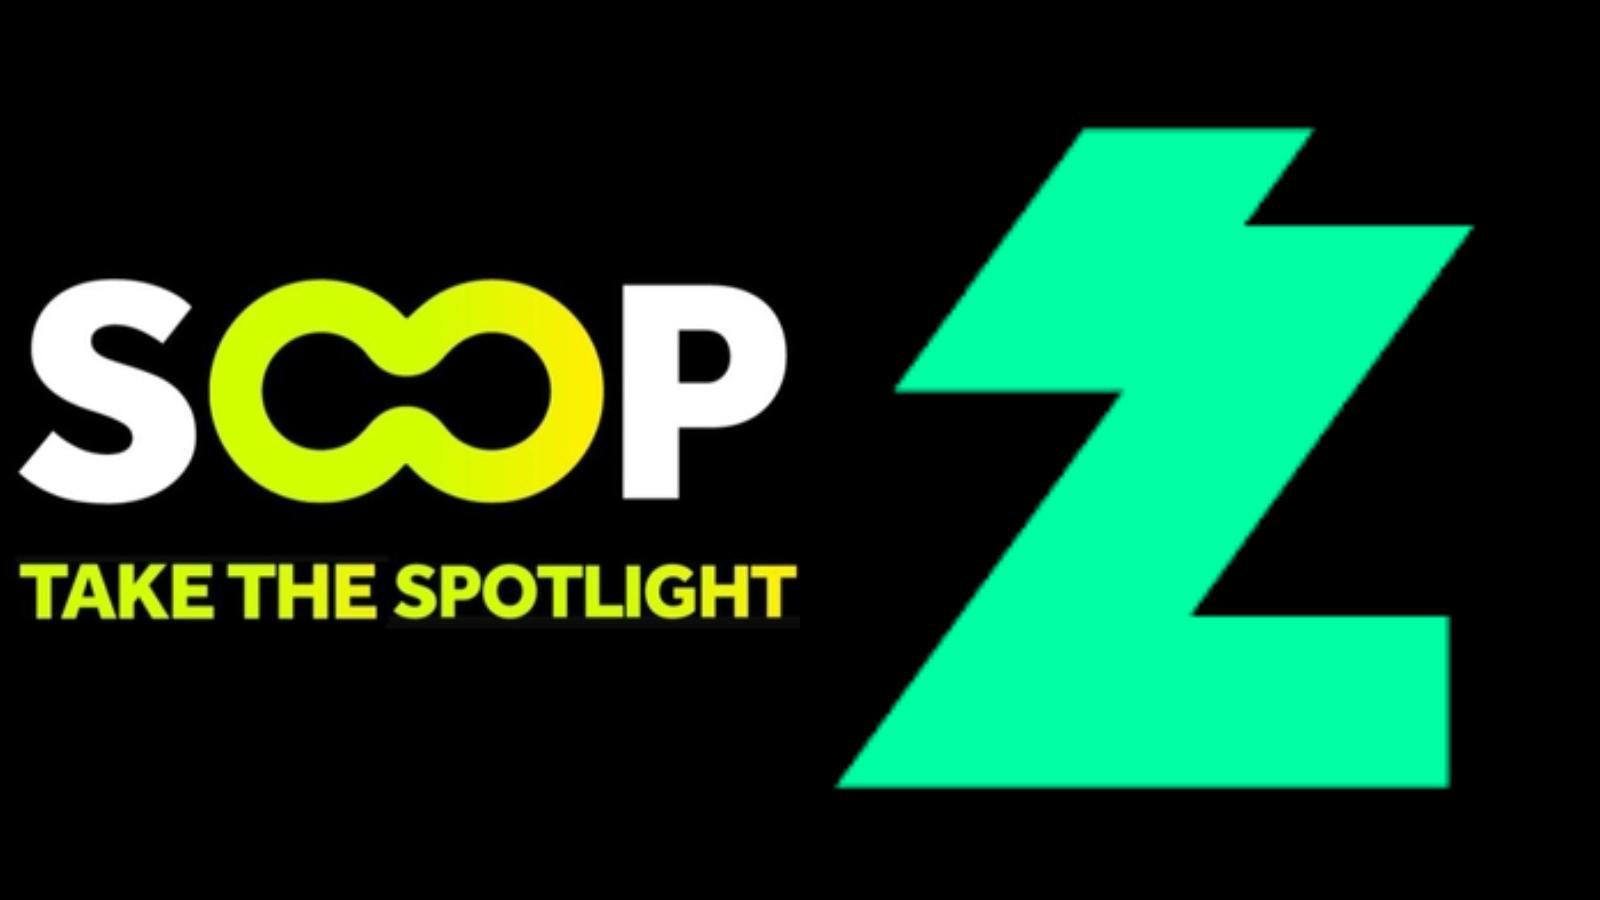 korean streaming services SOOP and CHZZK